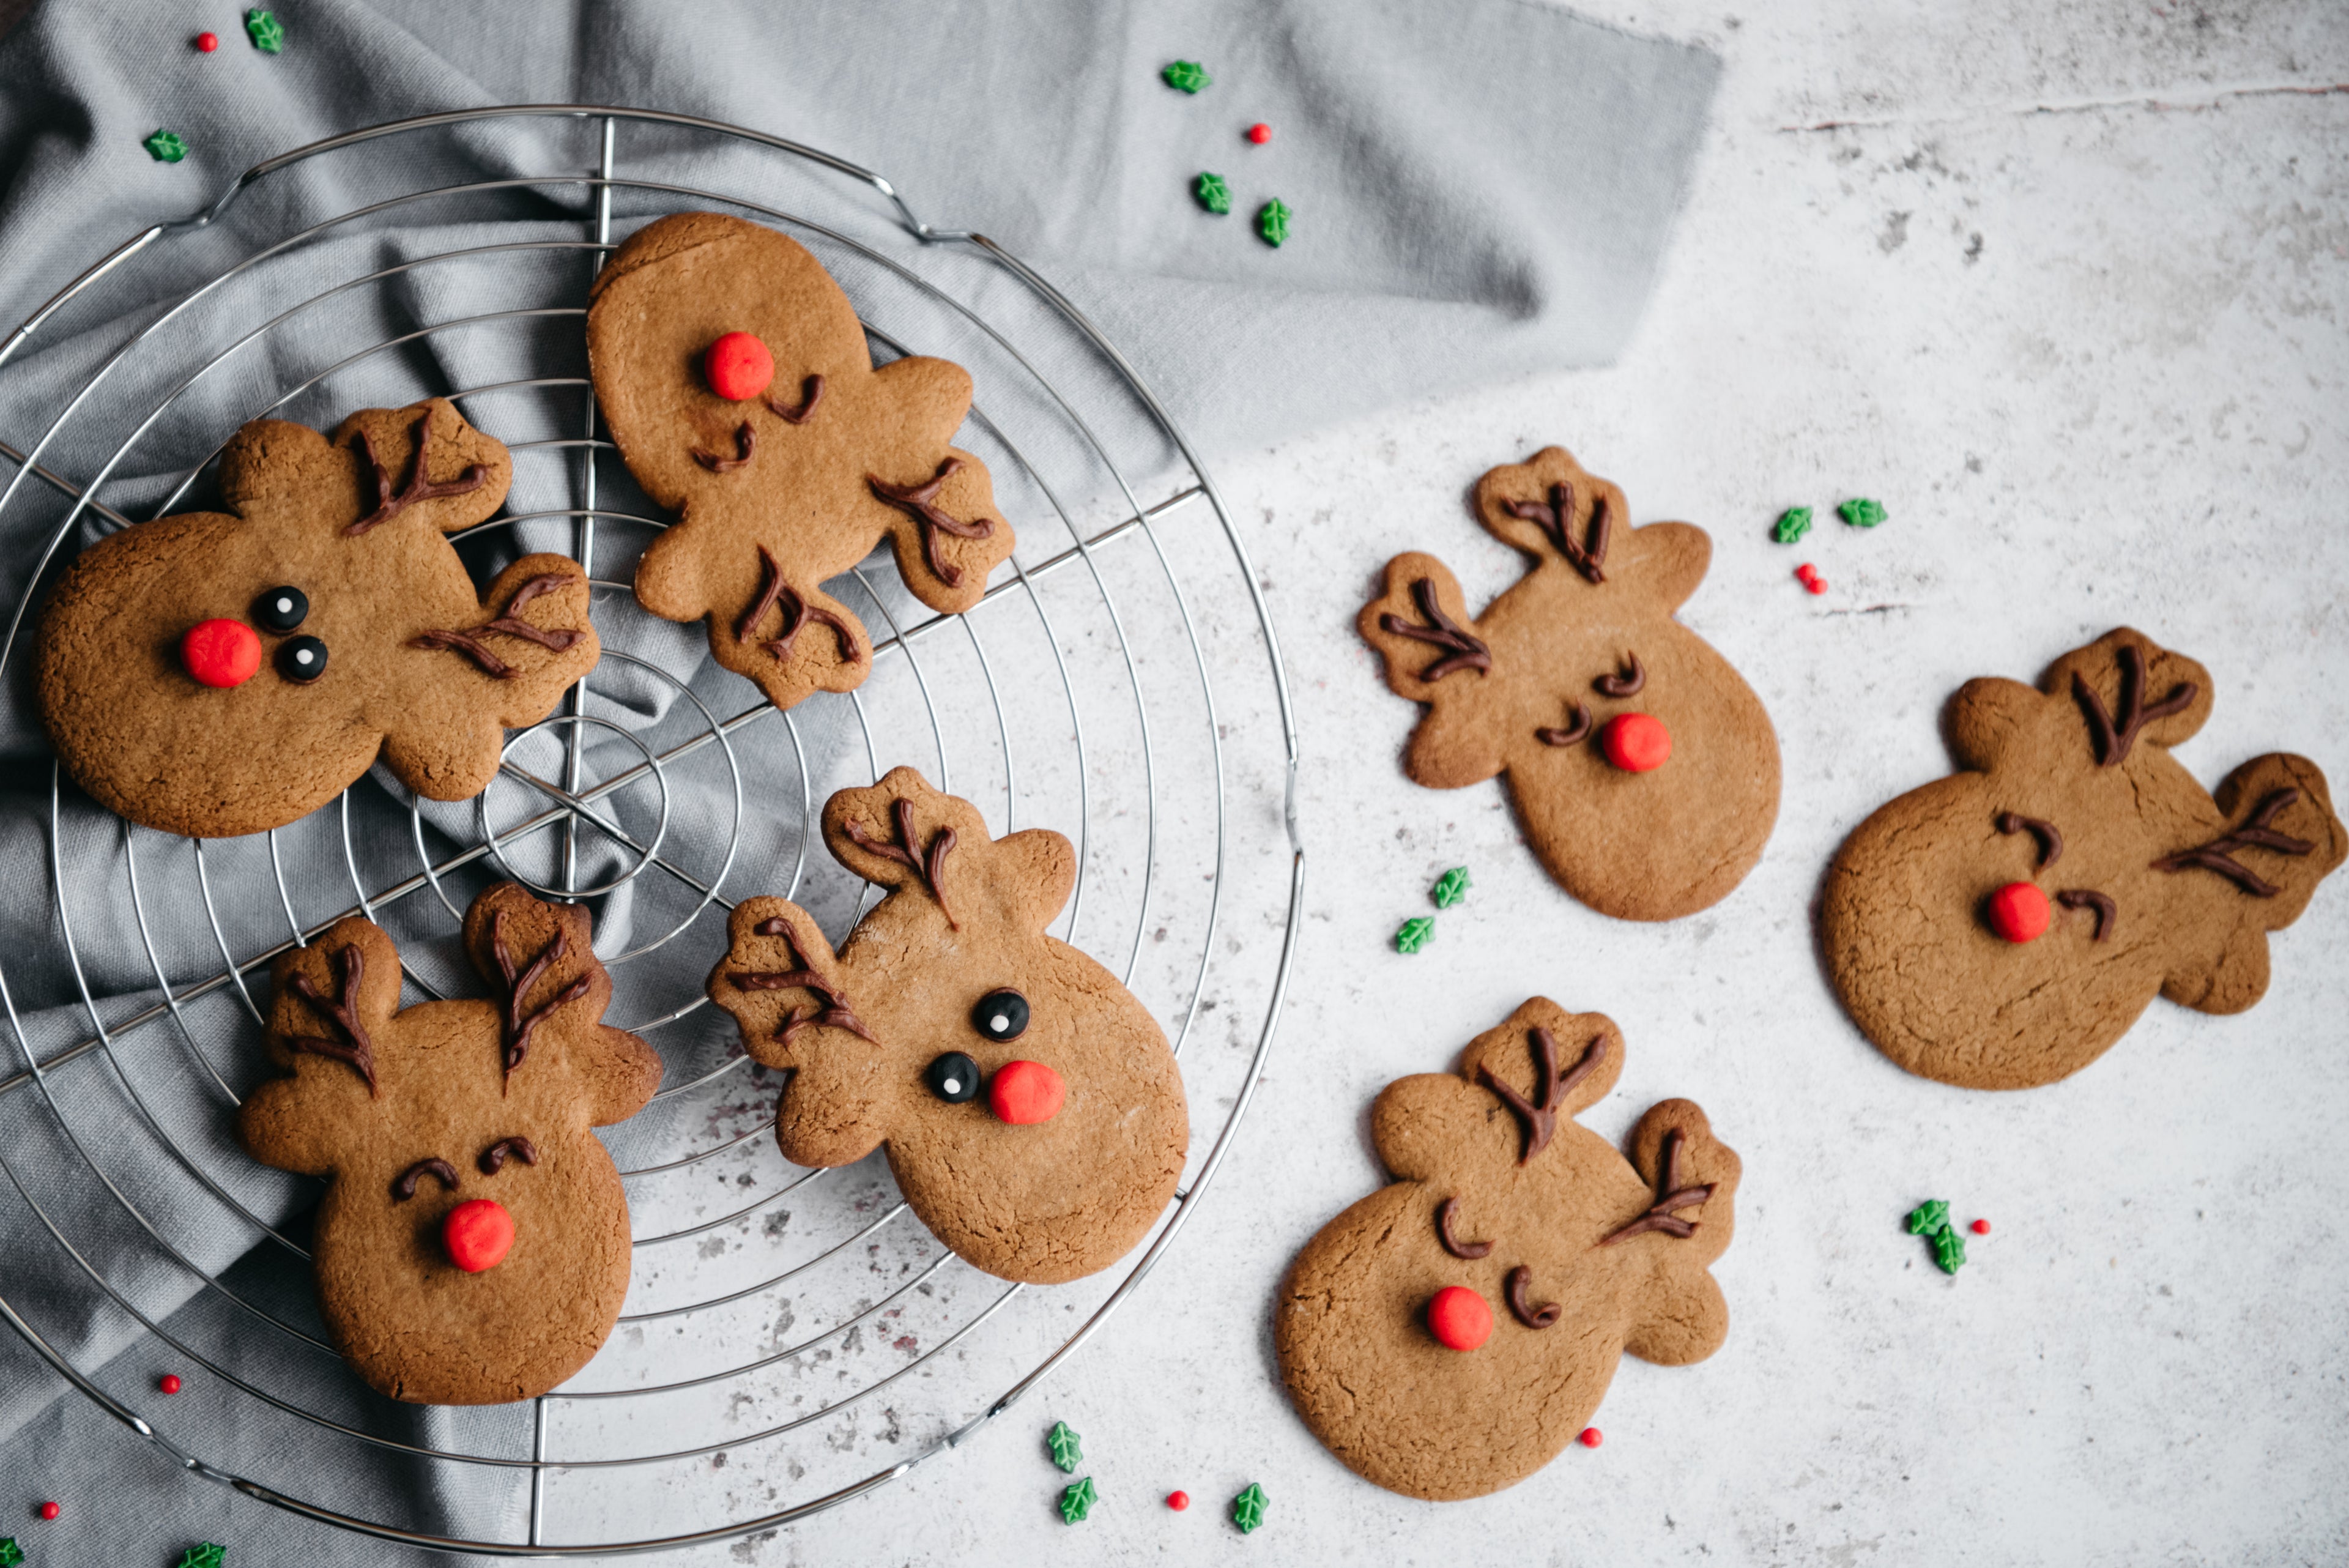 Top view of Reindeer Cookies on a wire cooling rack